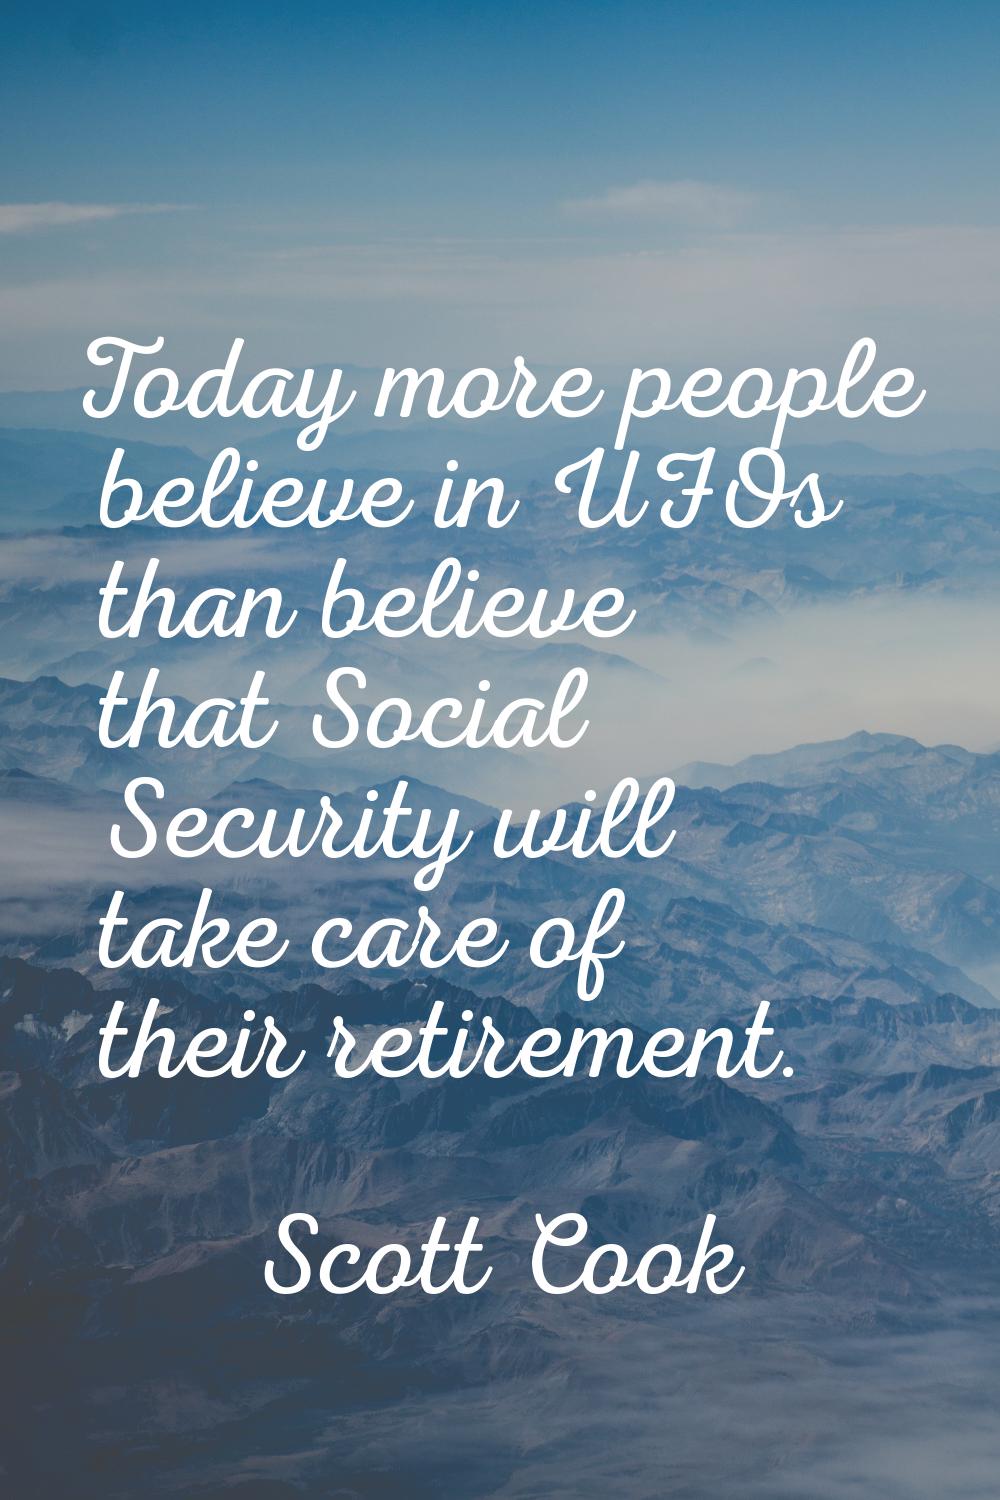 Today more people believe in UFOs than believe that Social Security will take care of their retirem